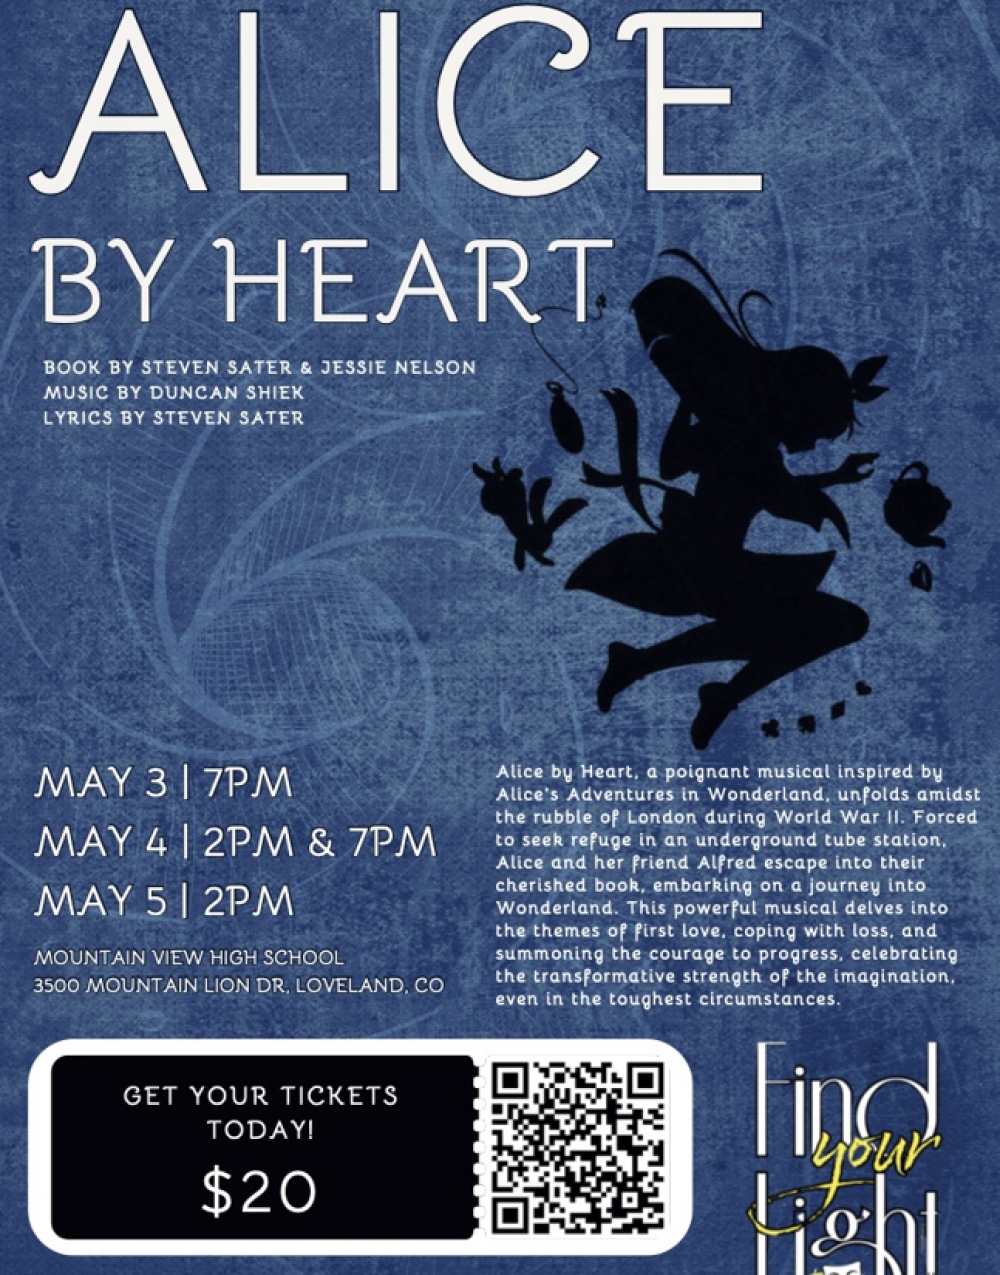 Alice By Heart at Find Your Light